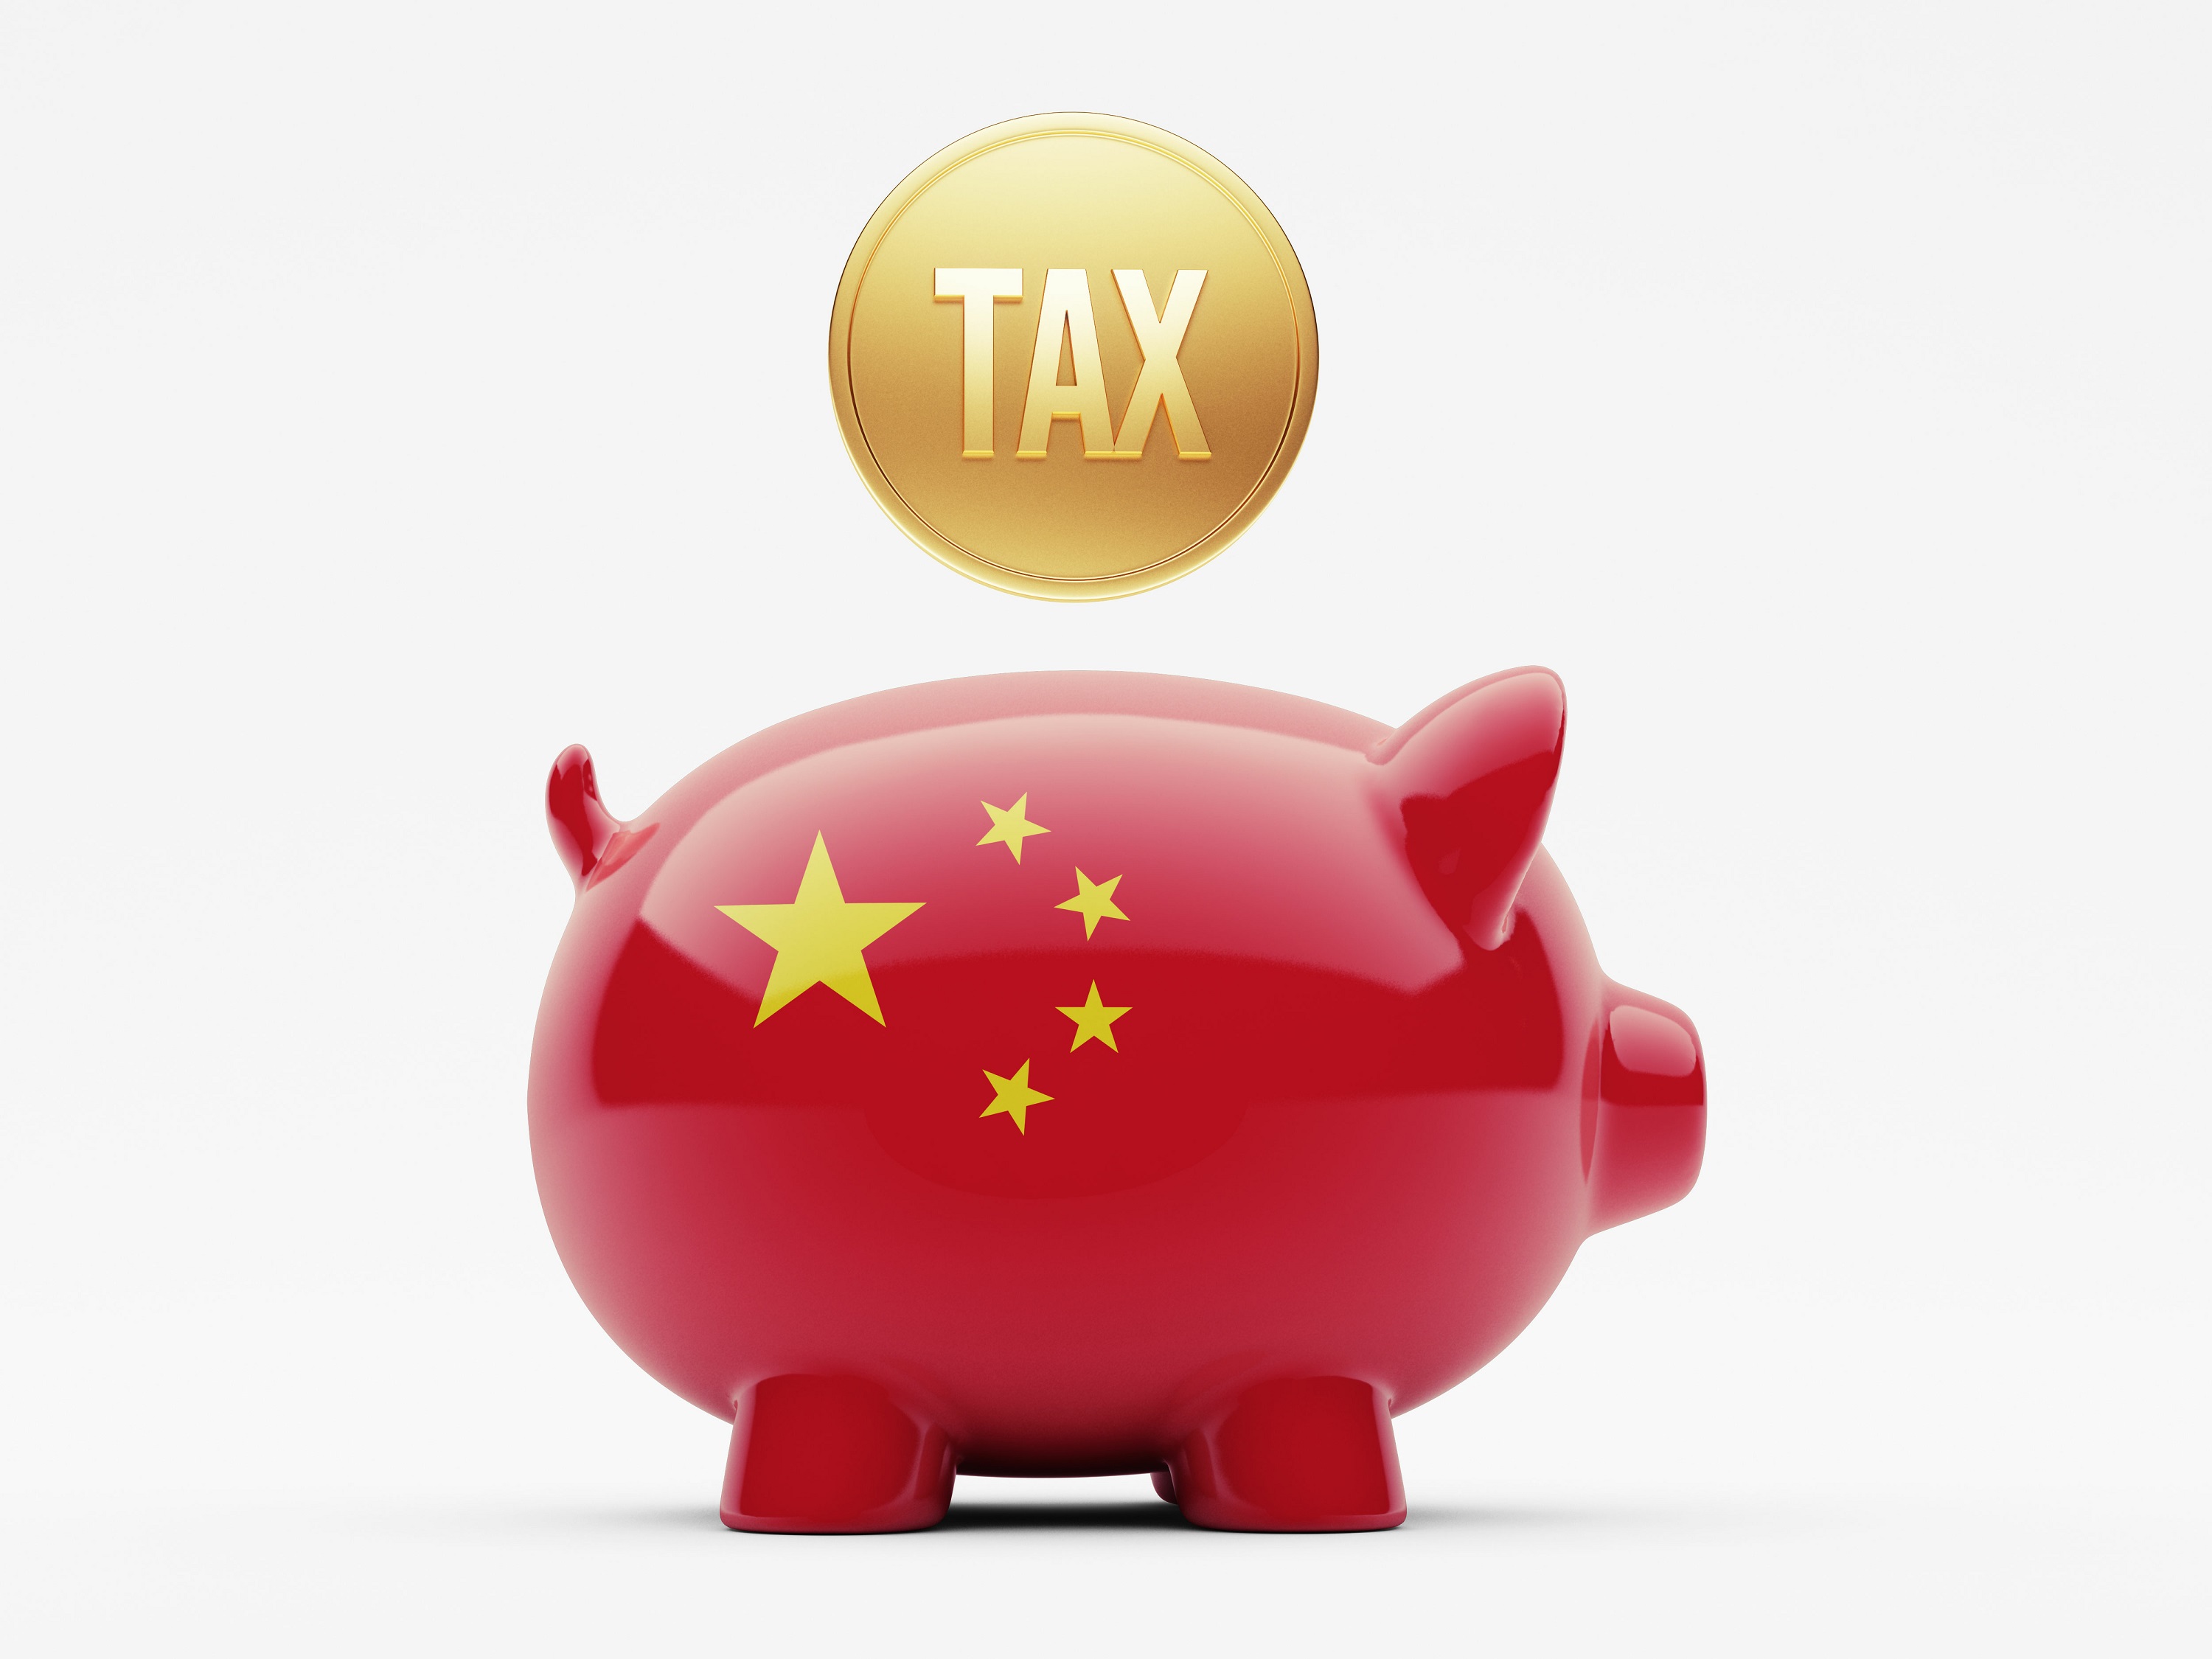 A golden coin with the word &ldquo;tax&rdquo; on it hangs above a piggy bank decorated in the colors of the Chinese flag.